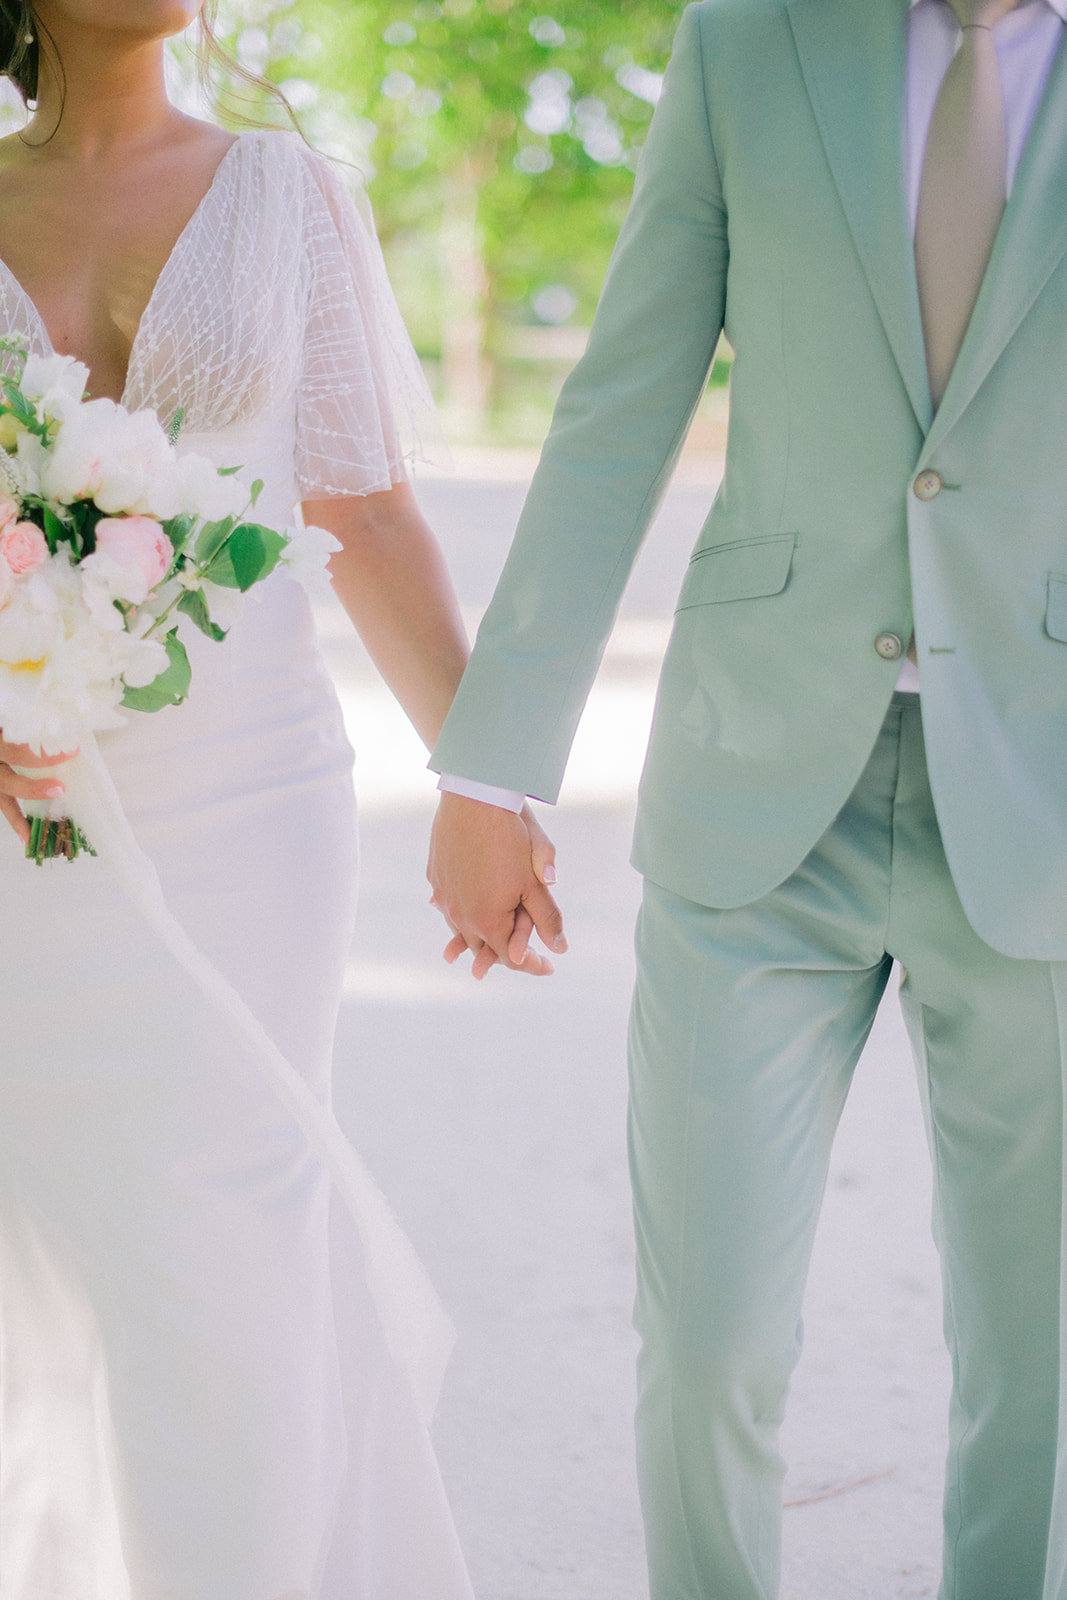  bride and groom hold hands